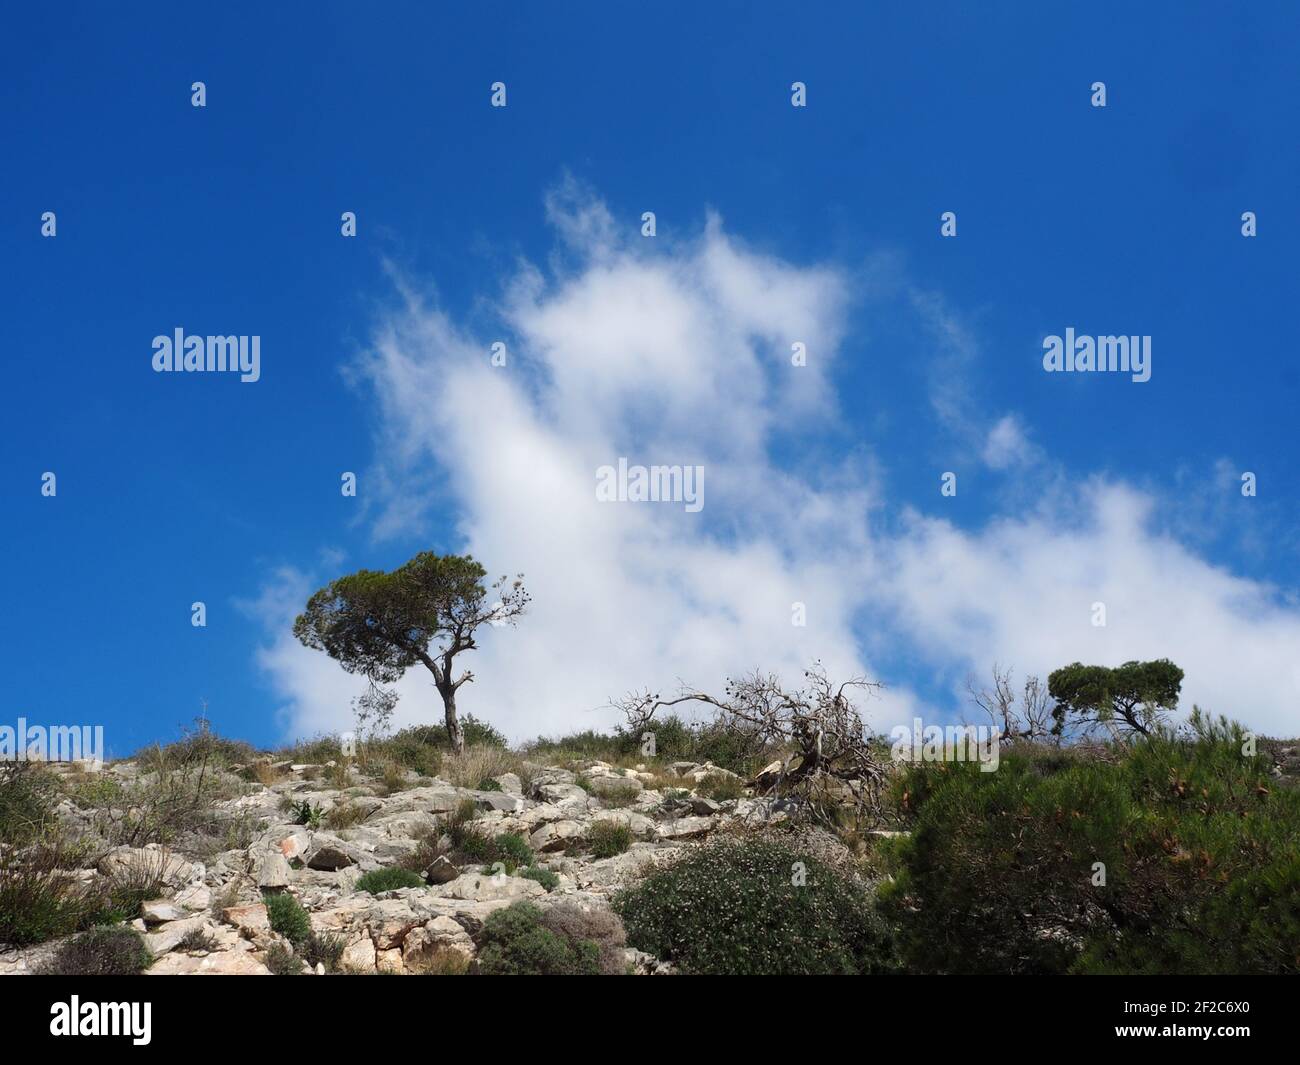 Lone pine trees on a rocky mountain near Athens, Greece, with with clouds in a vivid blue sky Stock Photo